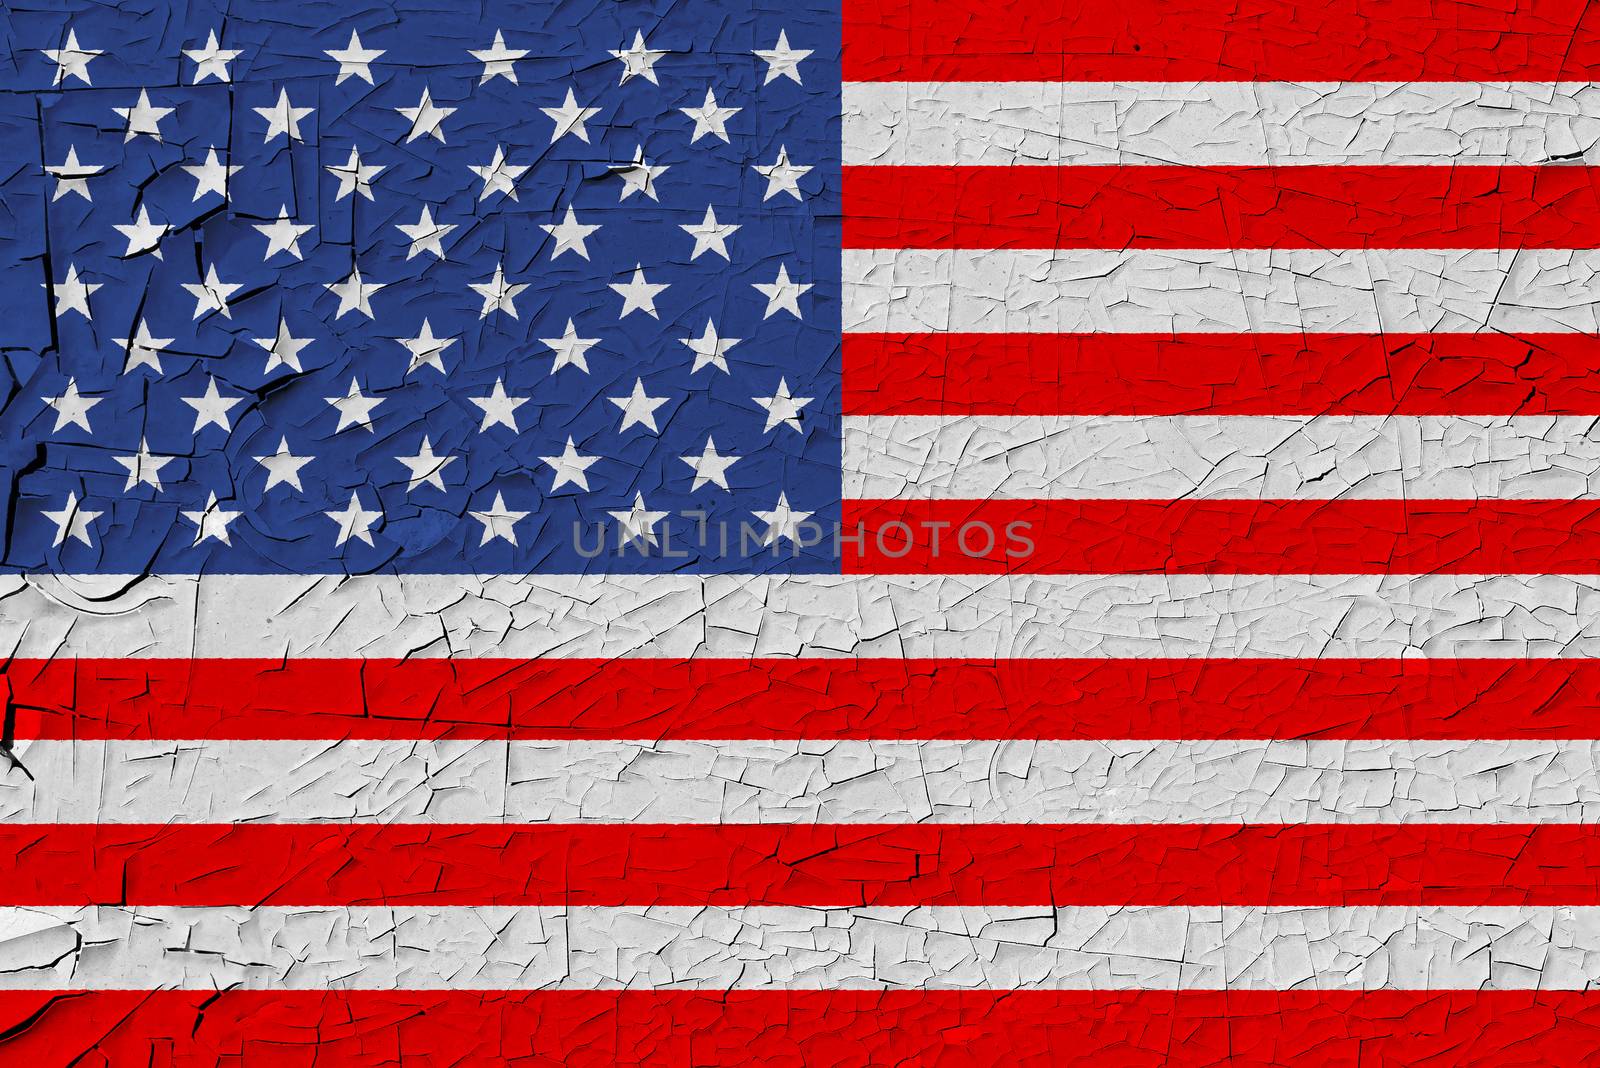 United States of America painted flag. Patriotic old grunge background. National flag of United States of America